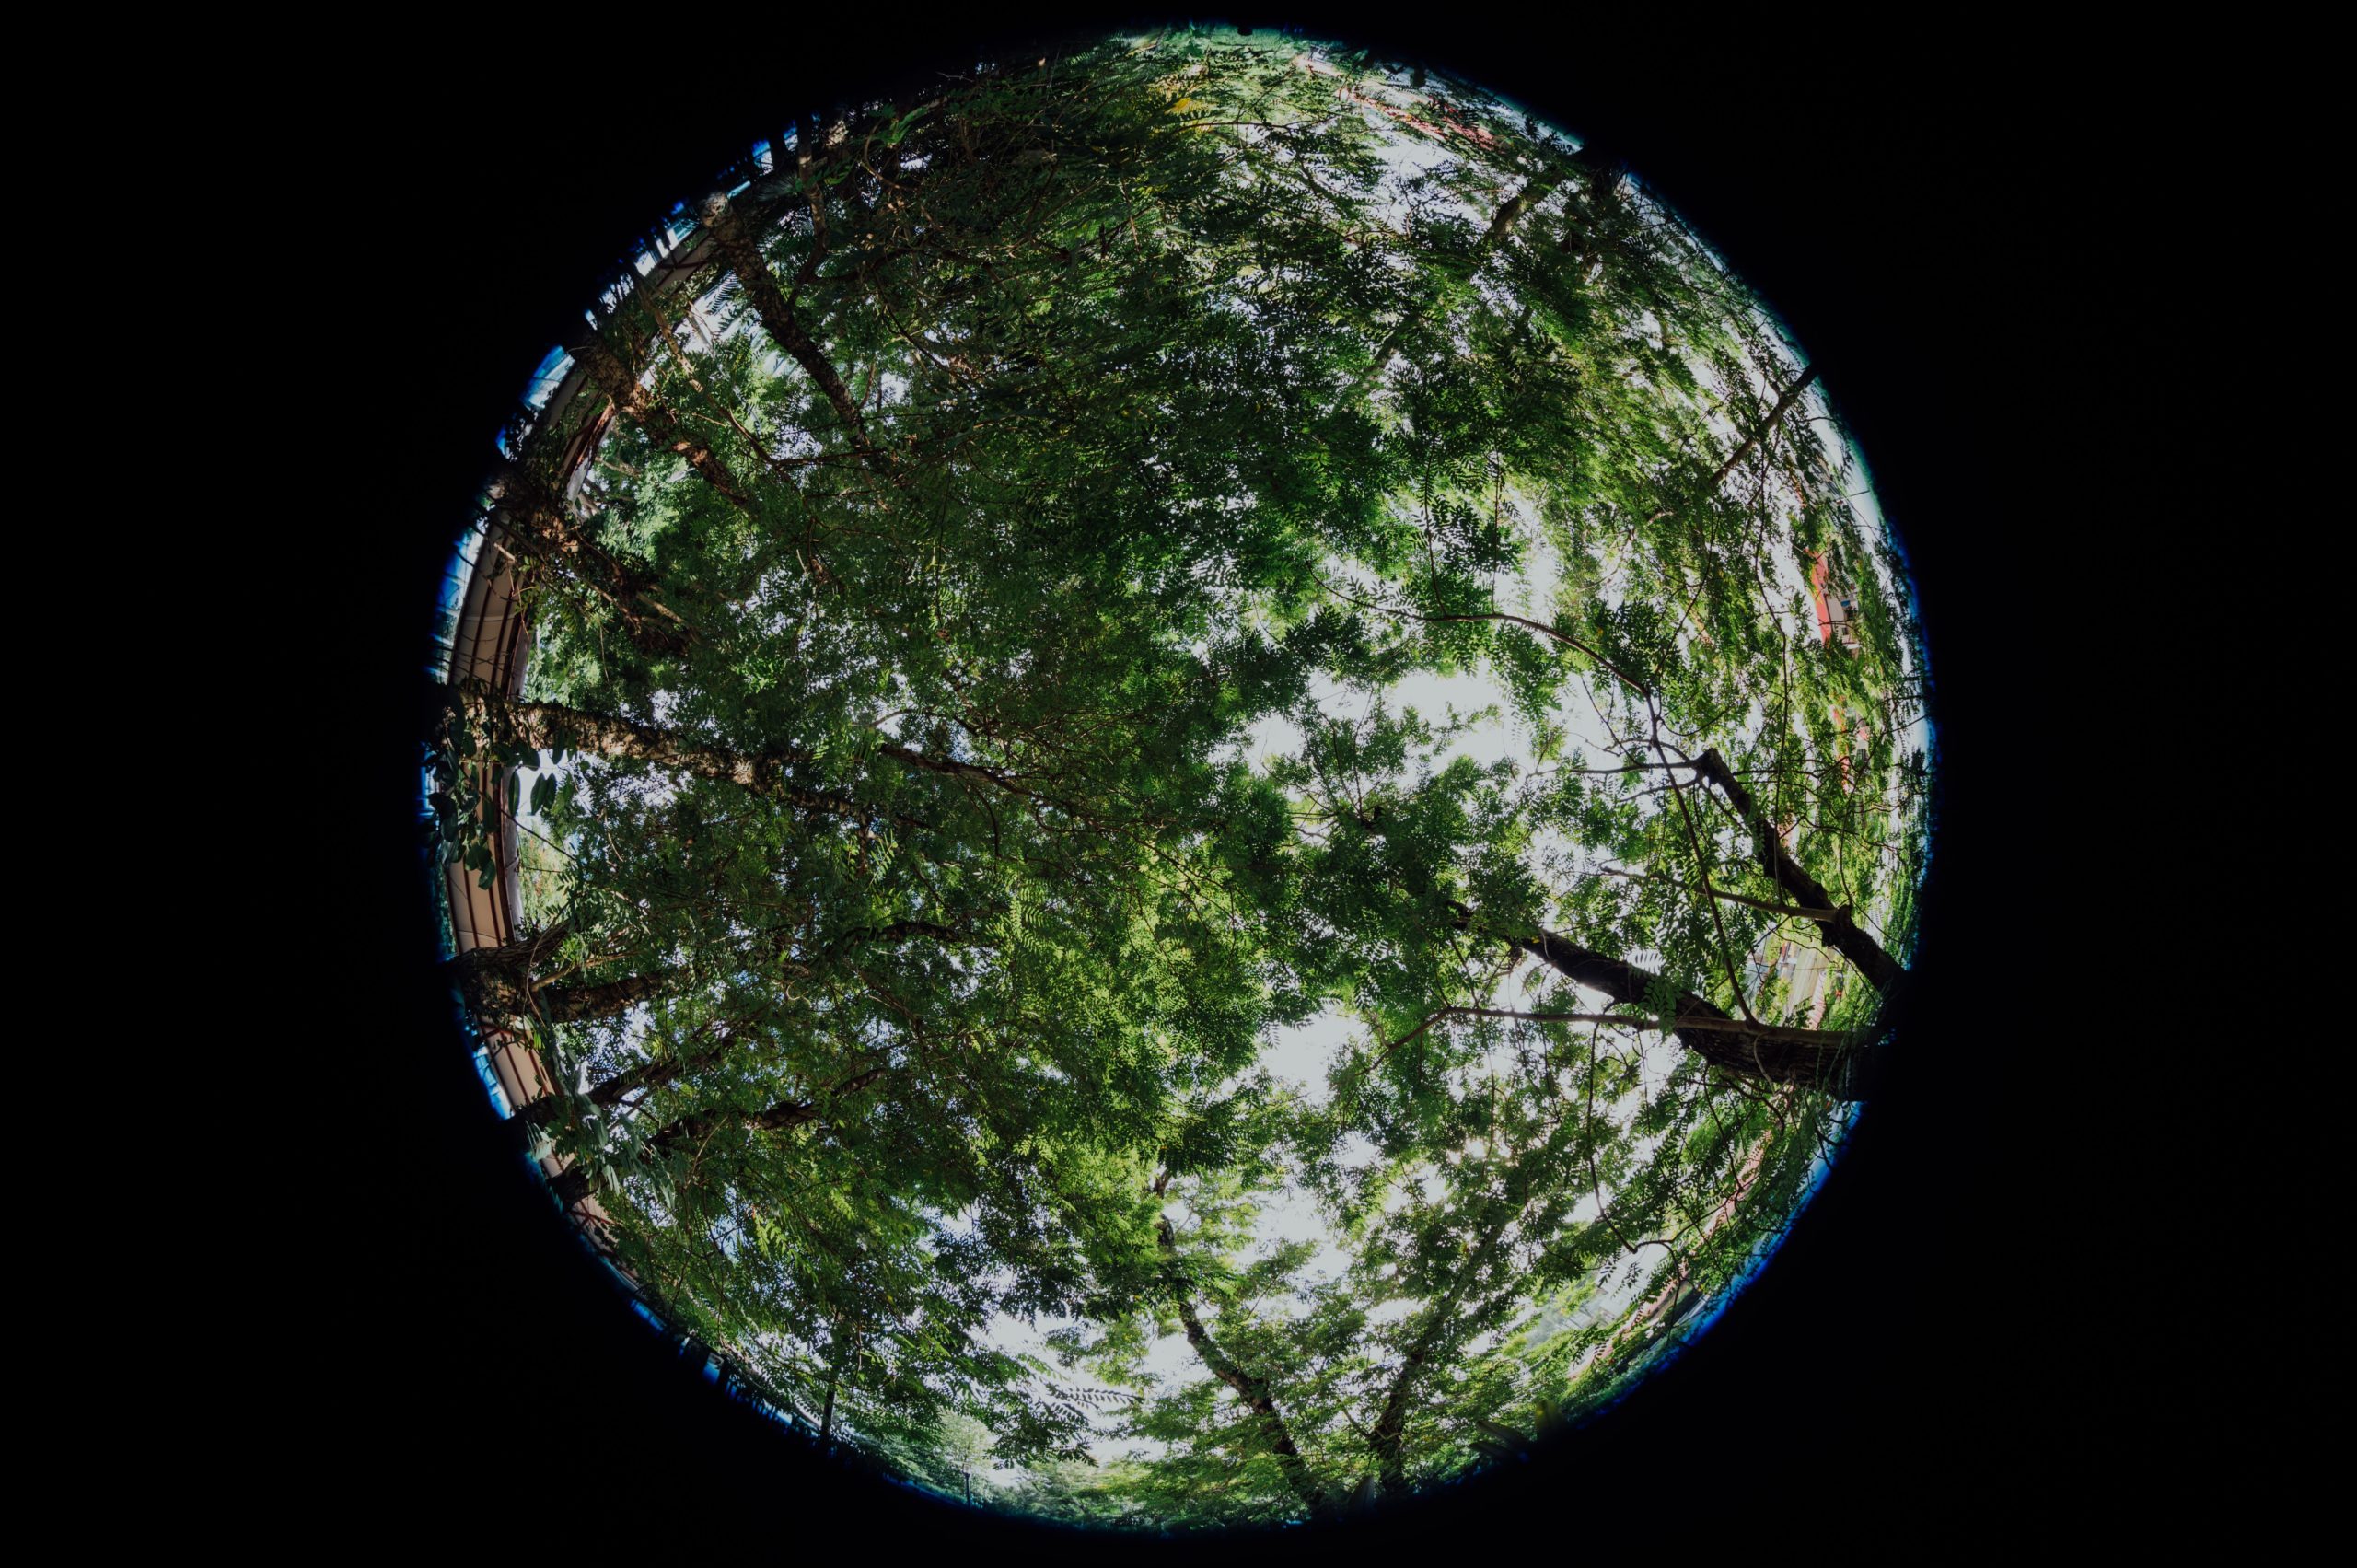 Trees in the circle, representing a green future